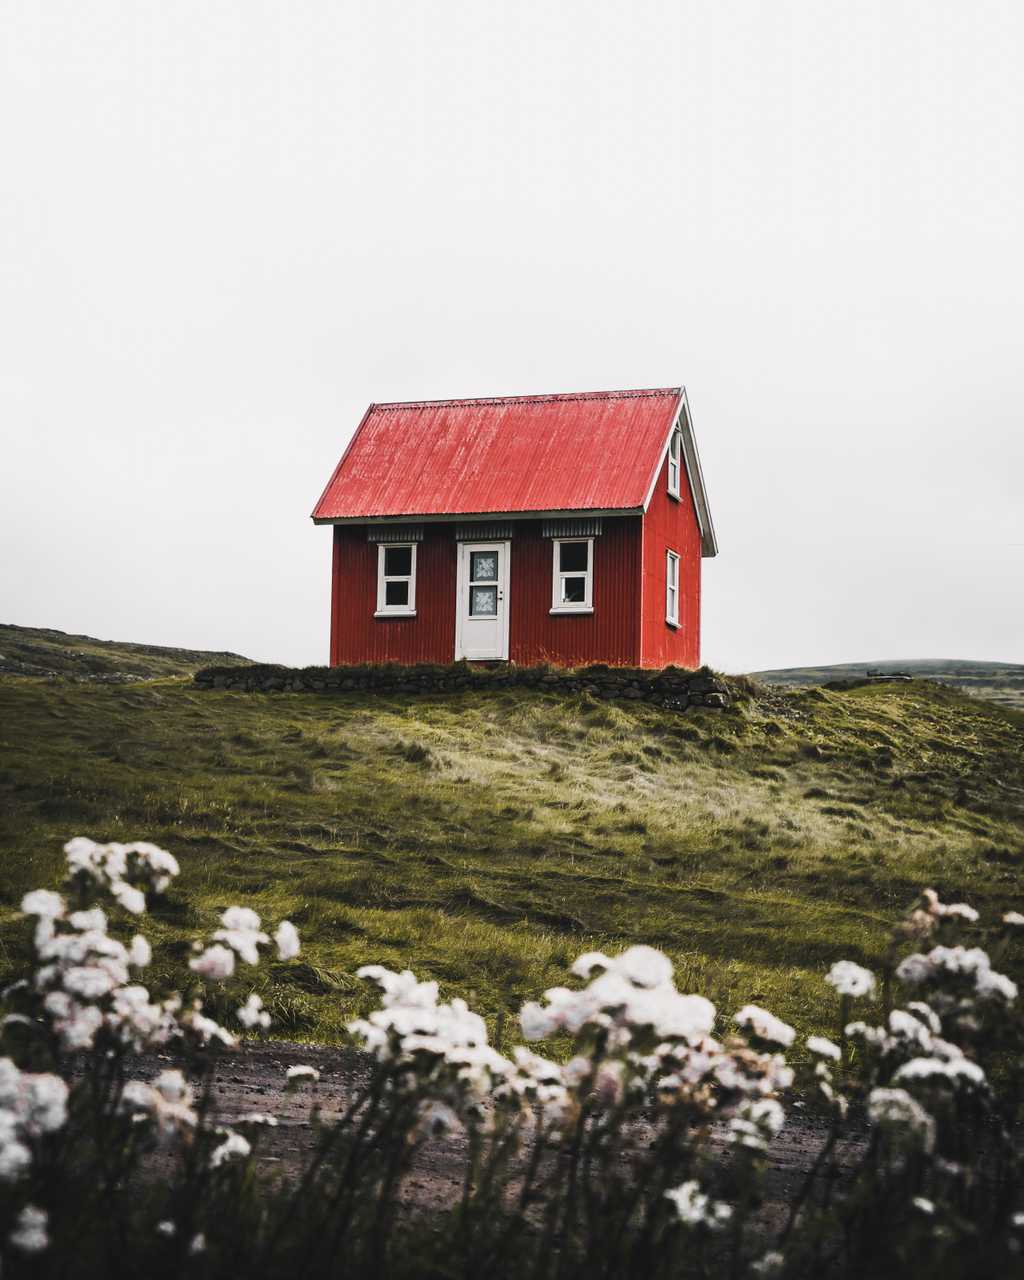 Finding a home - Unsplash / @withluke